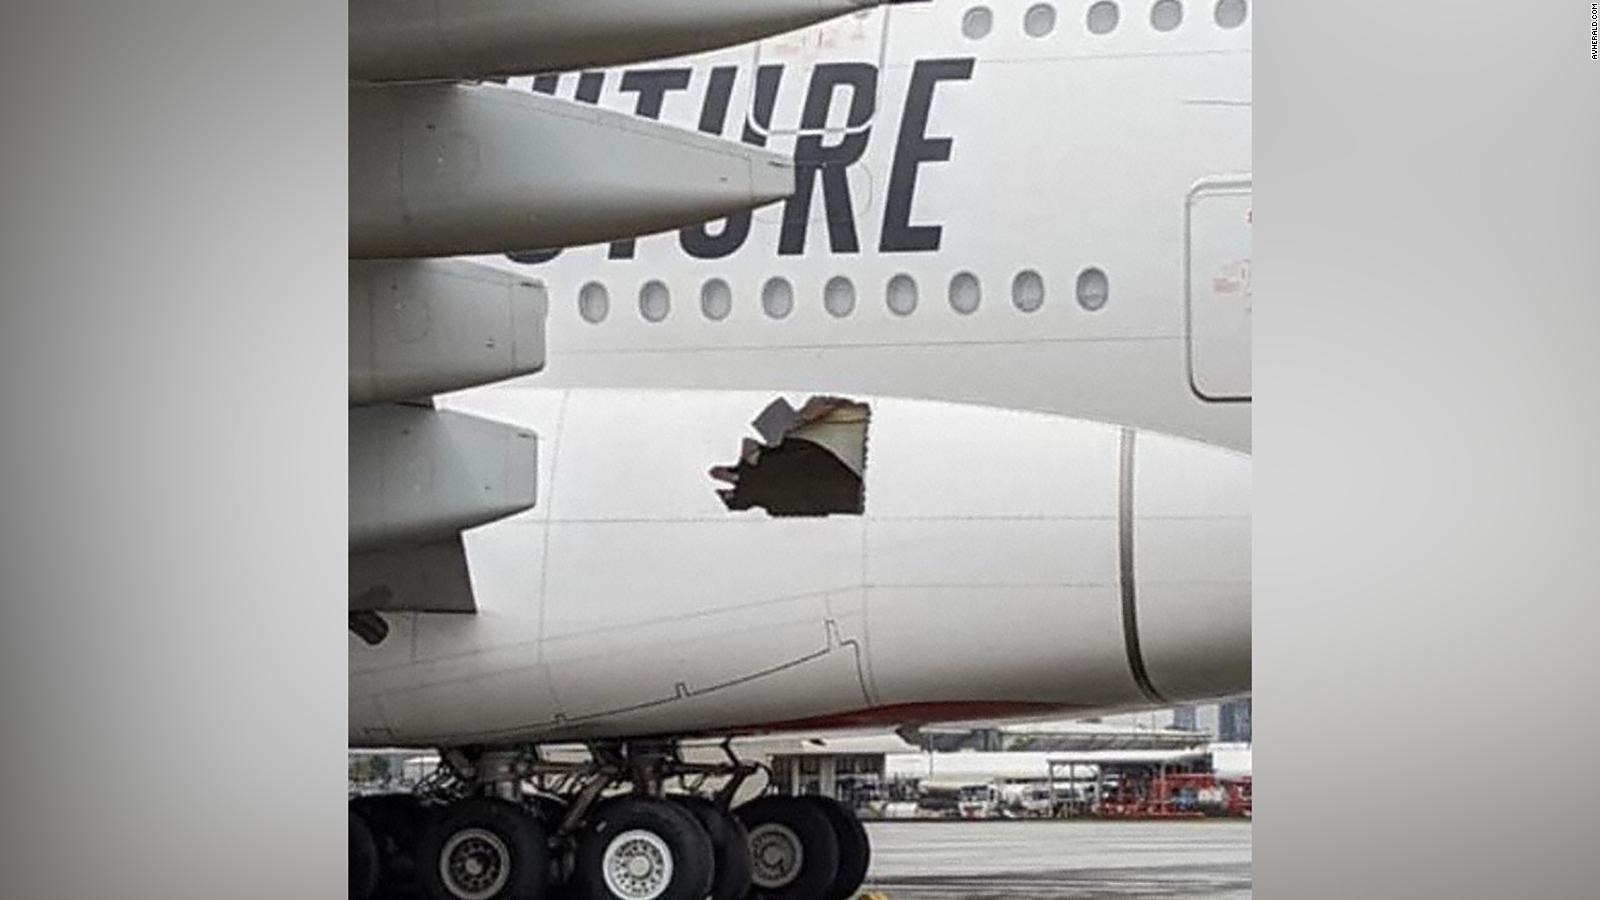 Airbus A380 ‘flyed for 14 hours’ with hole in side